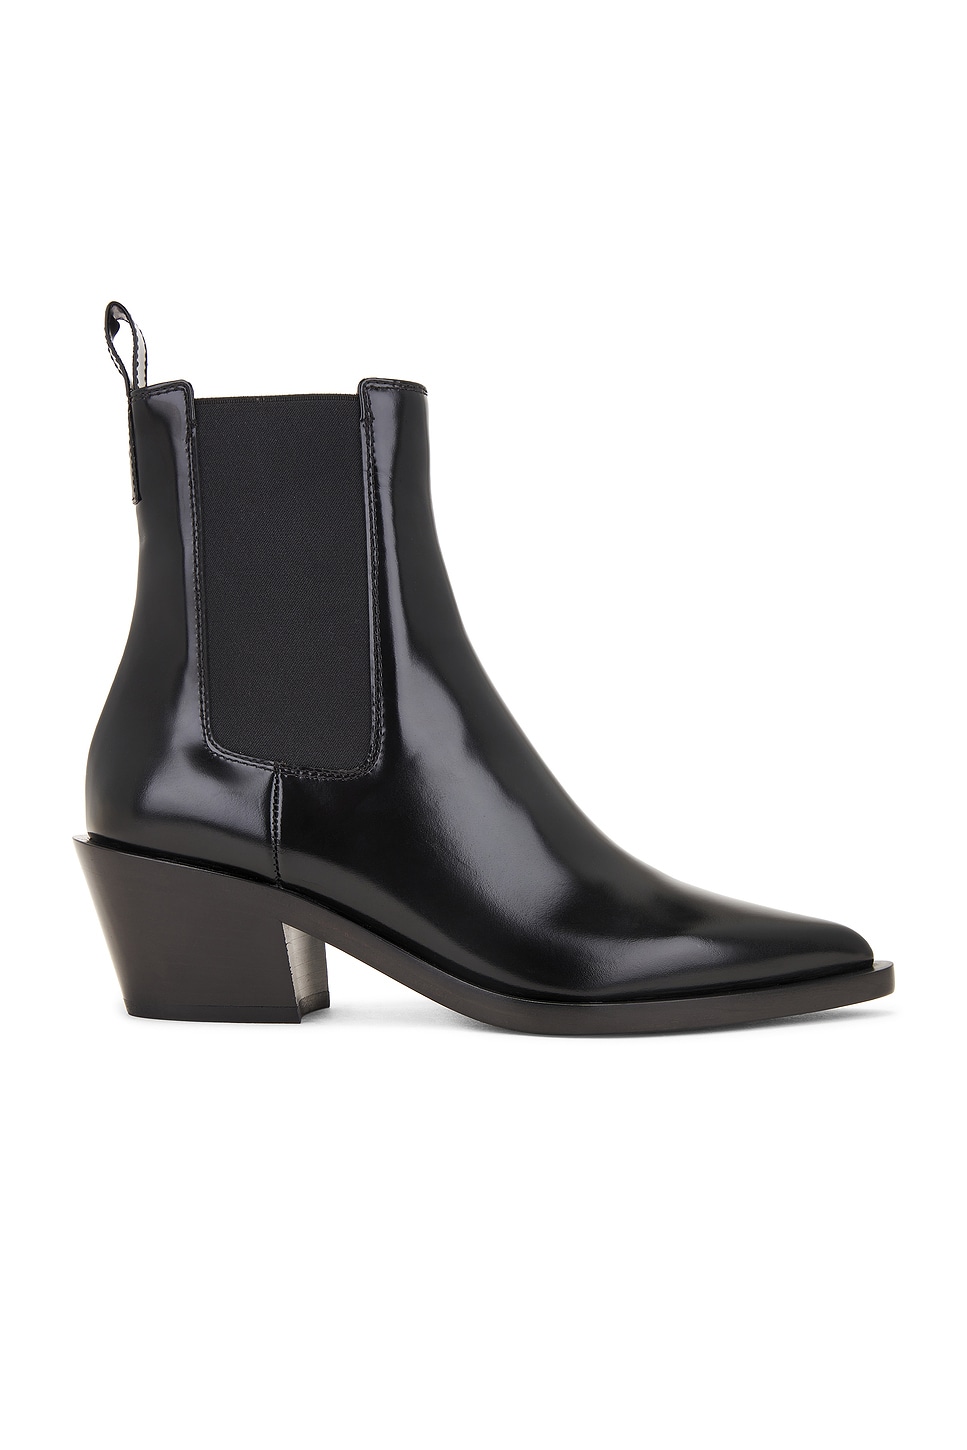 Image 1 of Gianvito Rossi Ankle Boot in Black